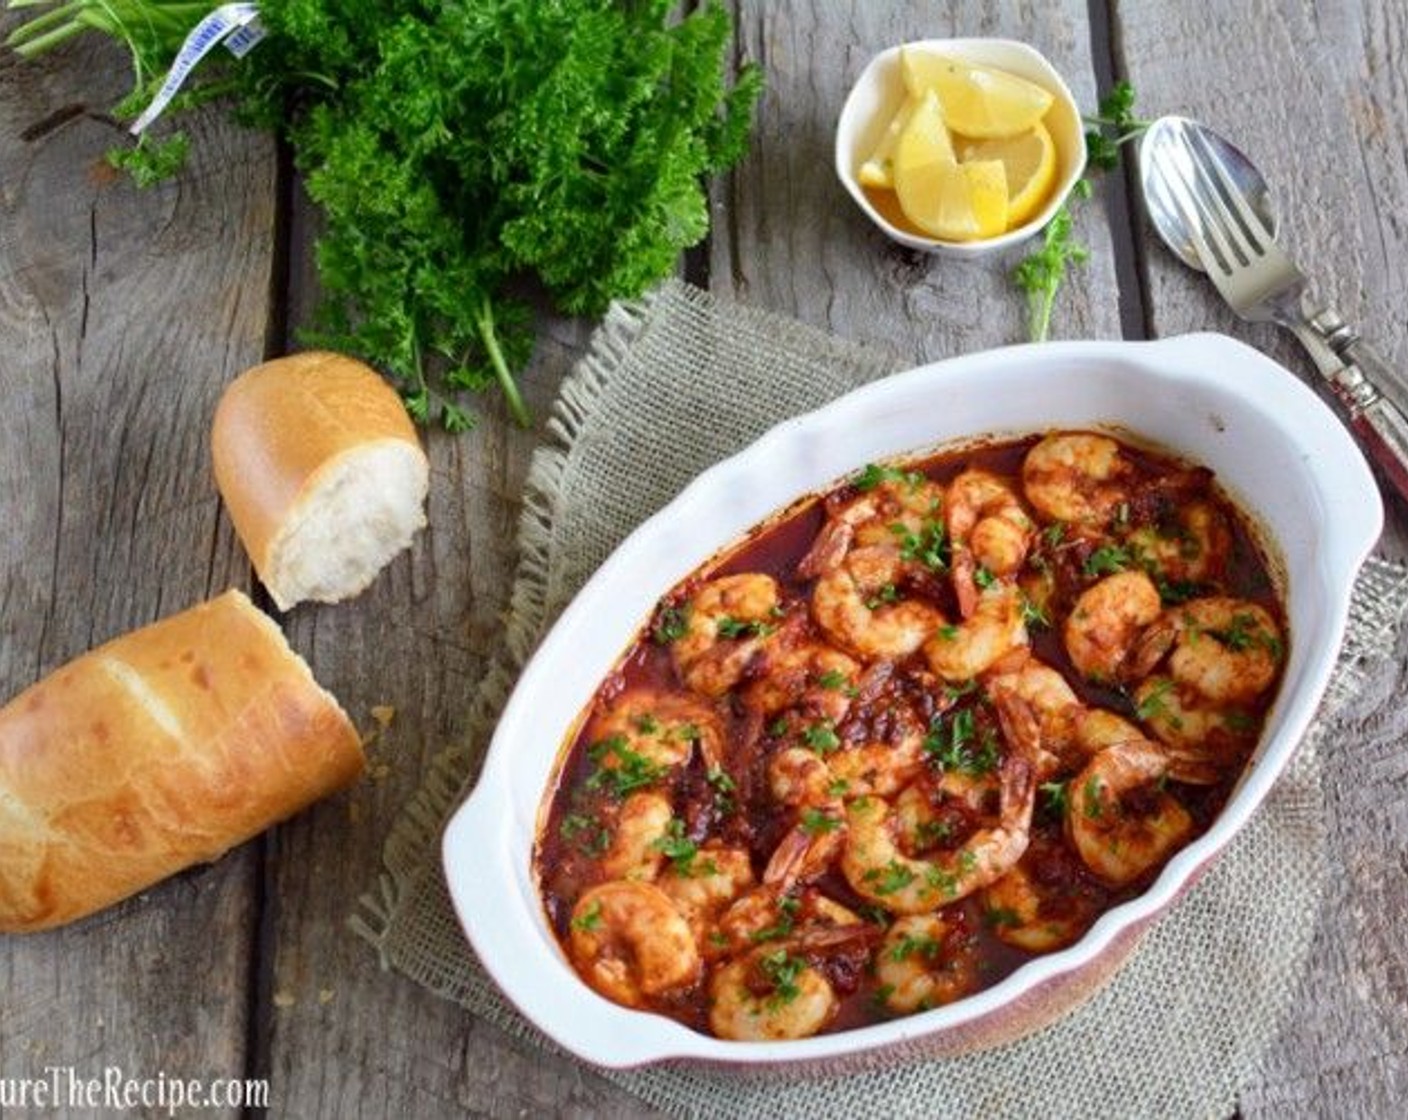 Spicy BBQ Shrimp (New Orleans Style)